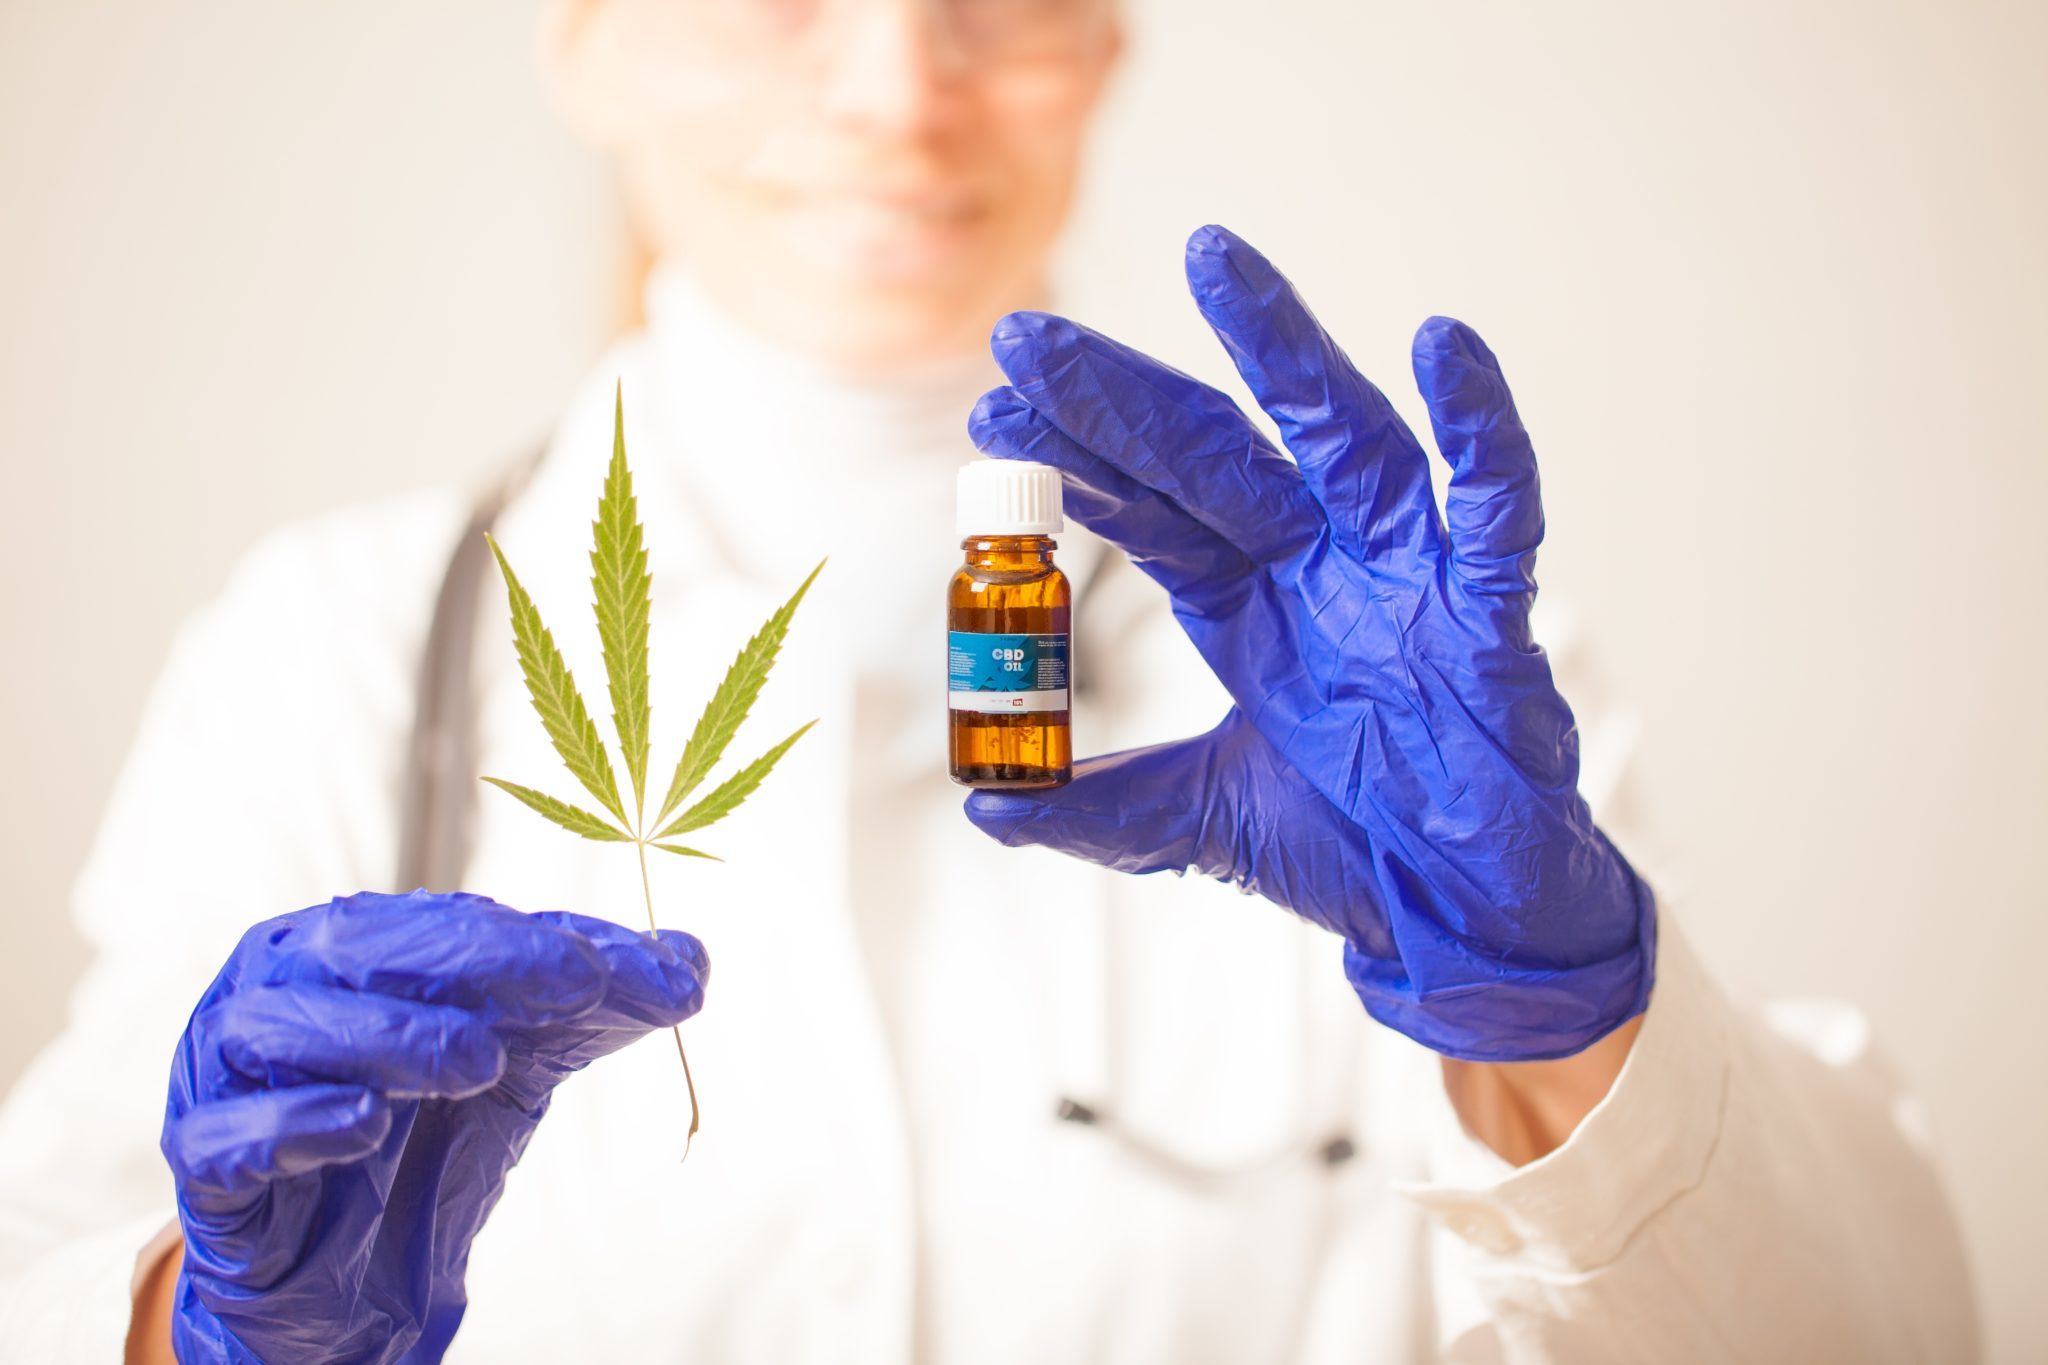 There's growing demand on cannabis & hemp product testing labs, but also renewed attention on their inconsistencies too. Photo: A gloved scientist with a vial of CBD and a hemp leaf.